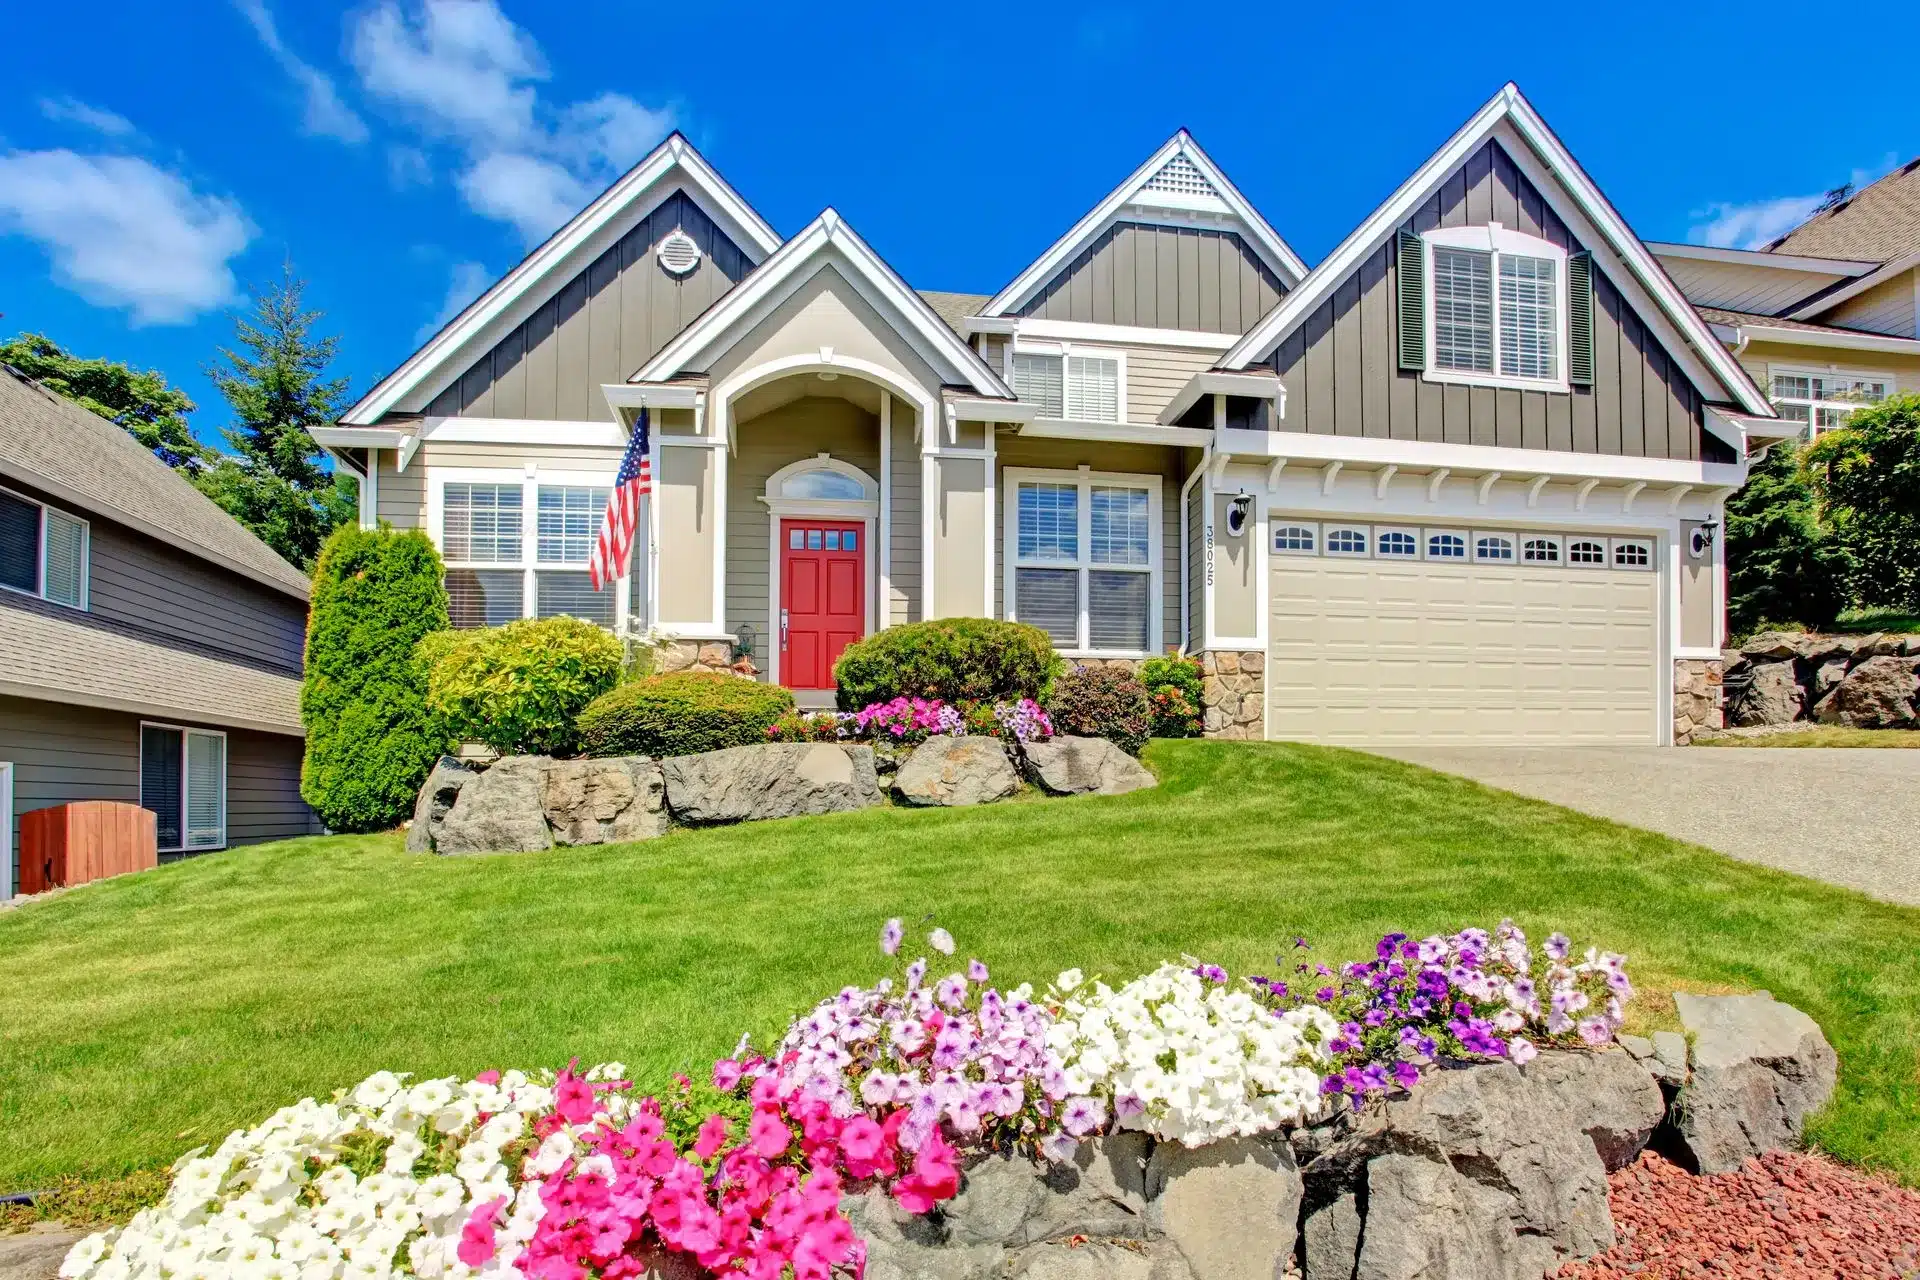 Is Your Home Exterior Dull or Dazzling? Six Simple Upgrades to Boost Your Curb Appeal